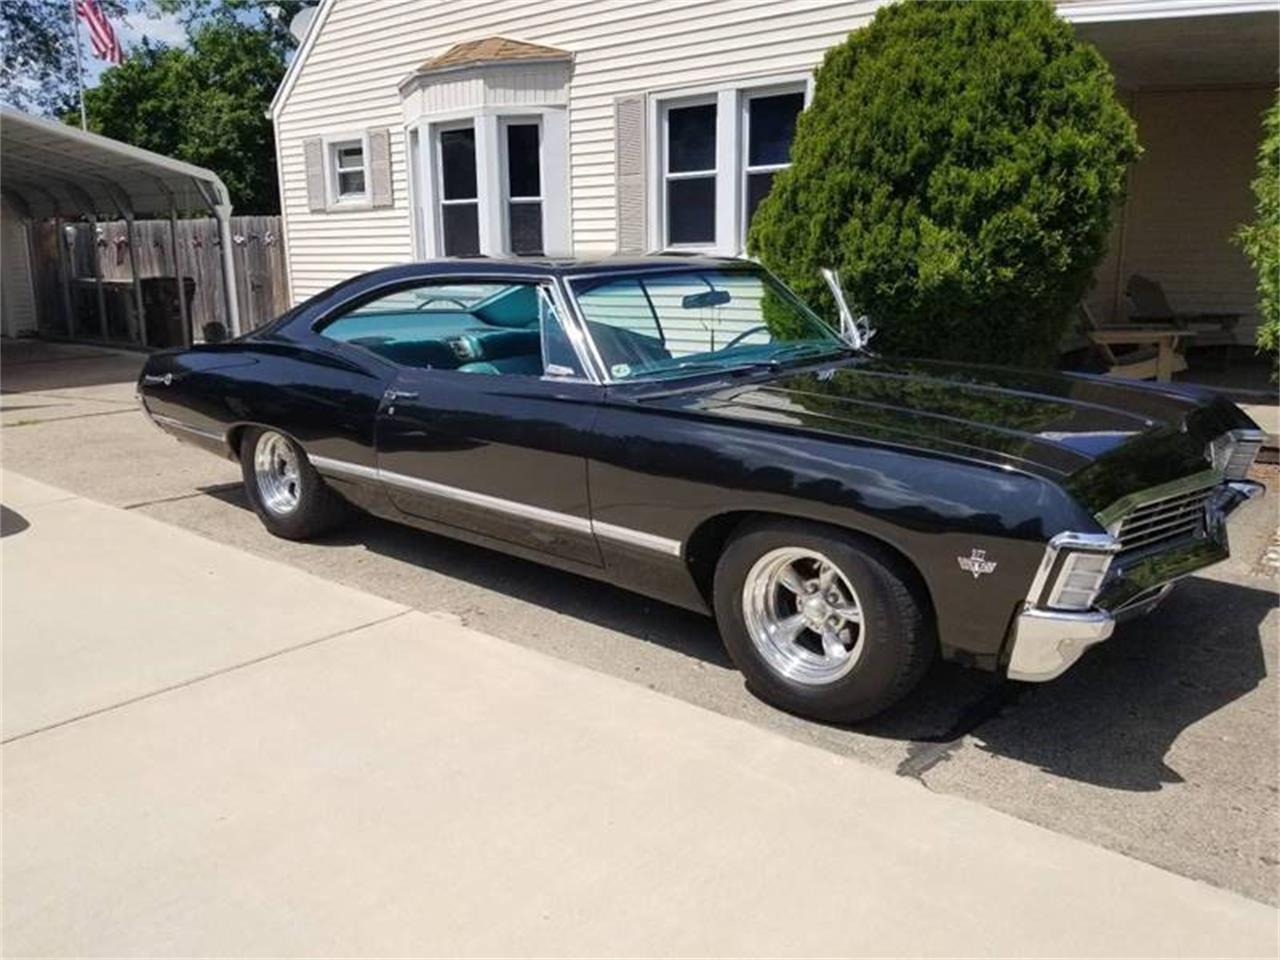 For Sale: 1967 Chevrolet Impala in Long Island, New York.